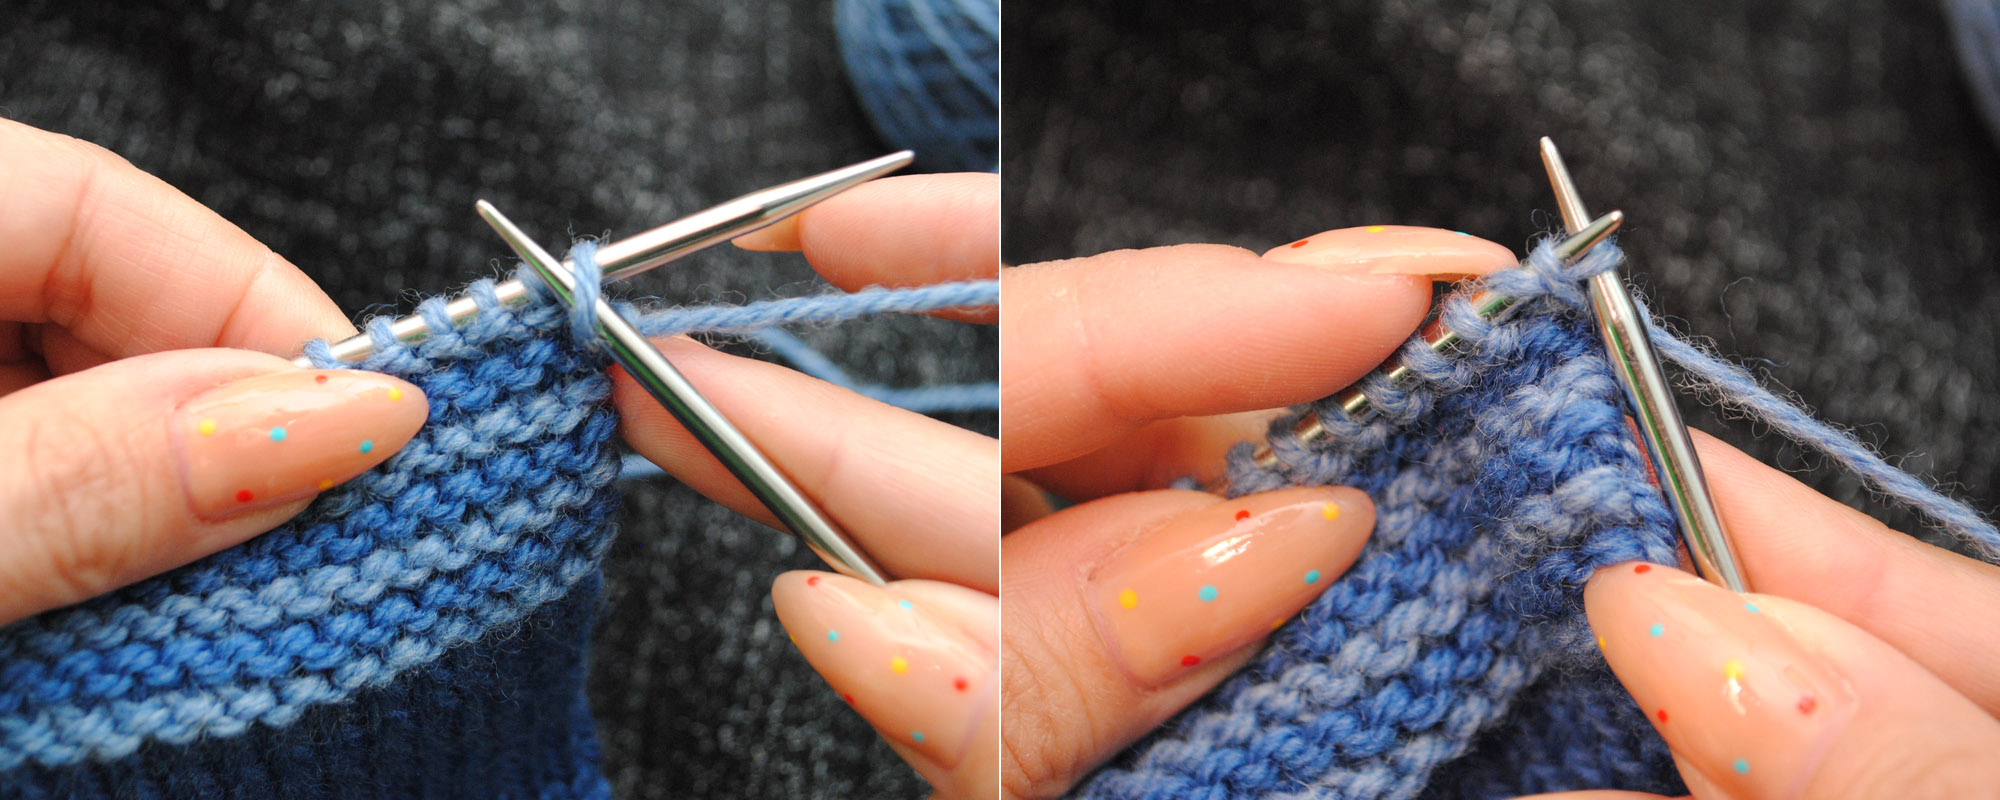 Icelandic bind off steps 1 and 2